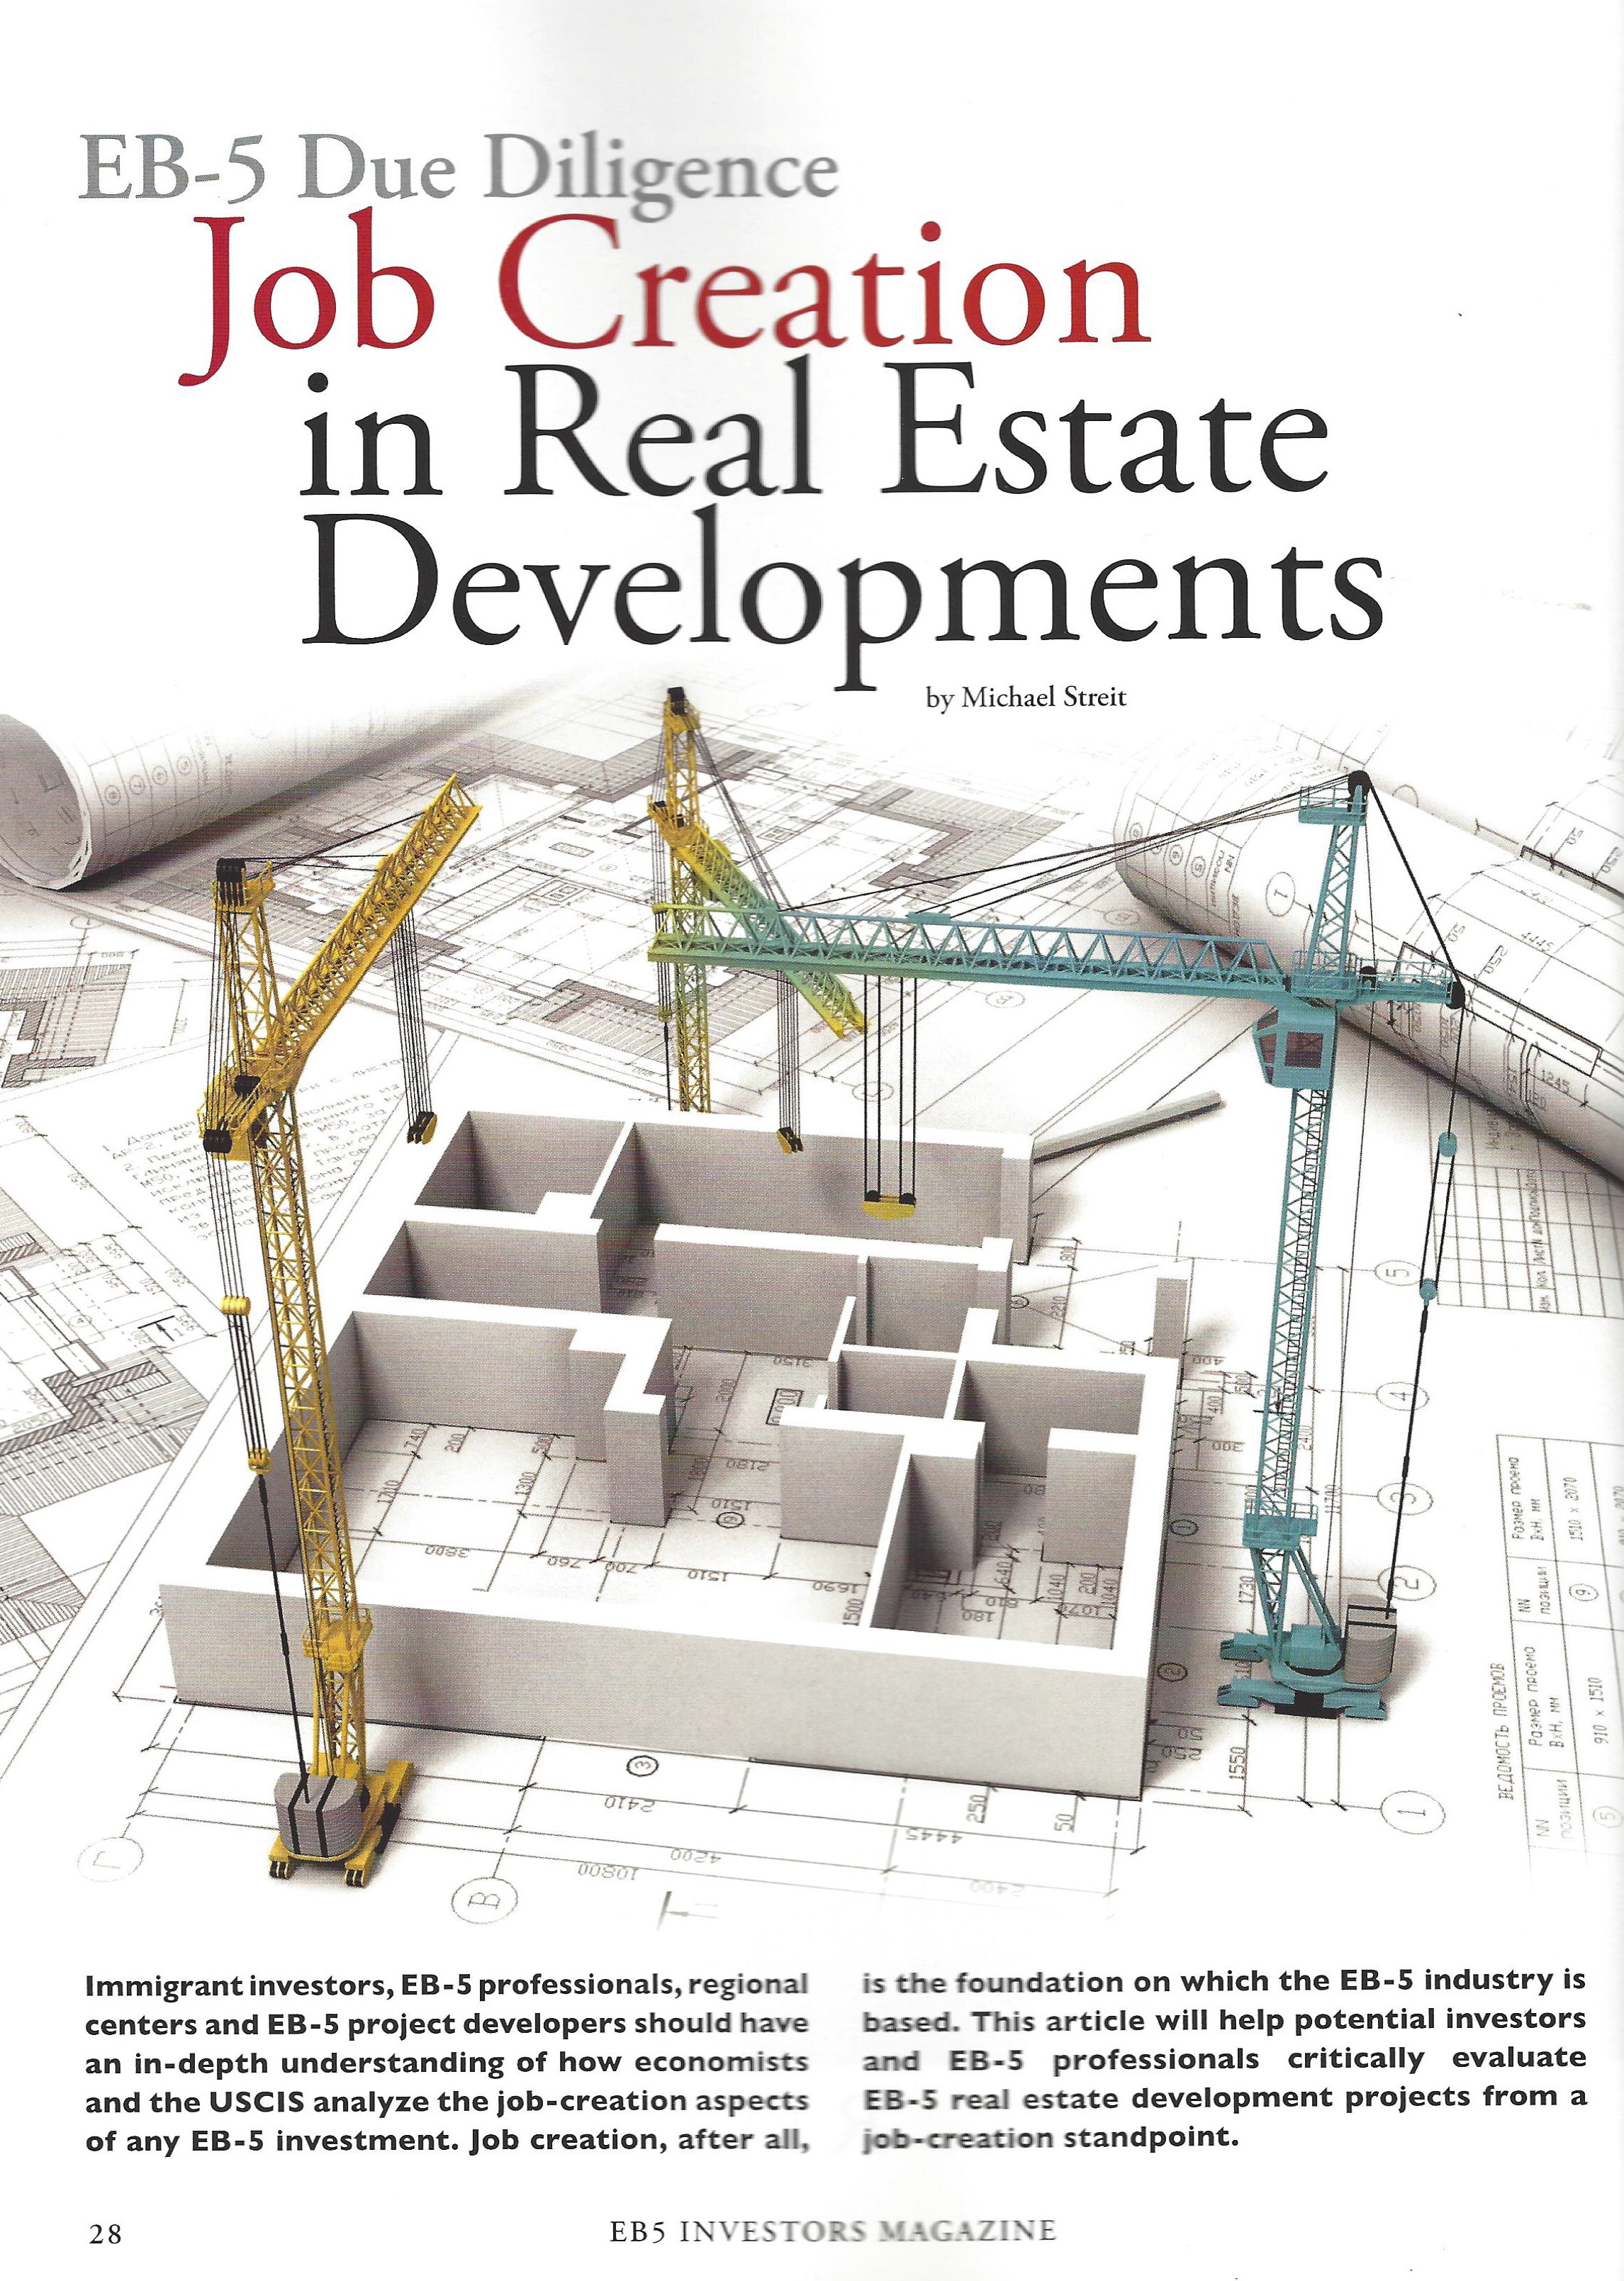 EB-5 Due Diligence Job Creation in Real Estate Developments